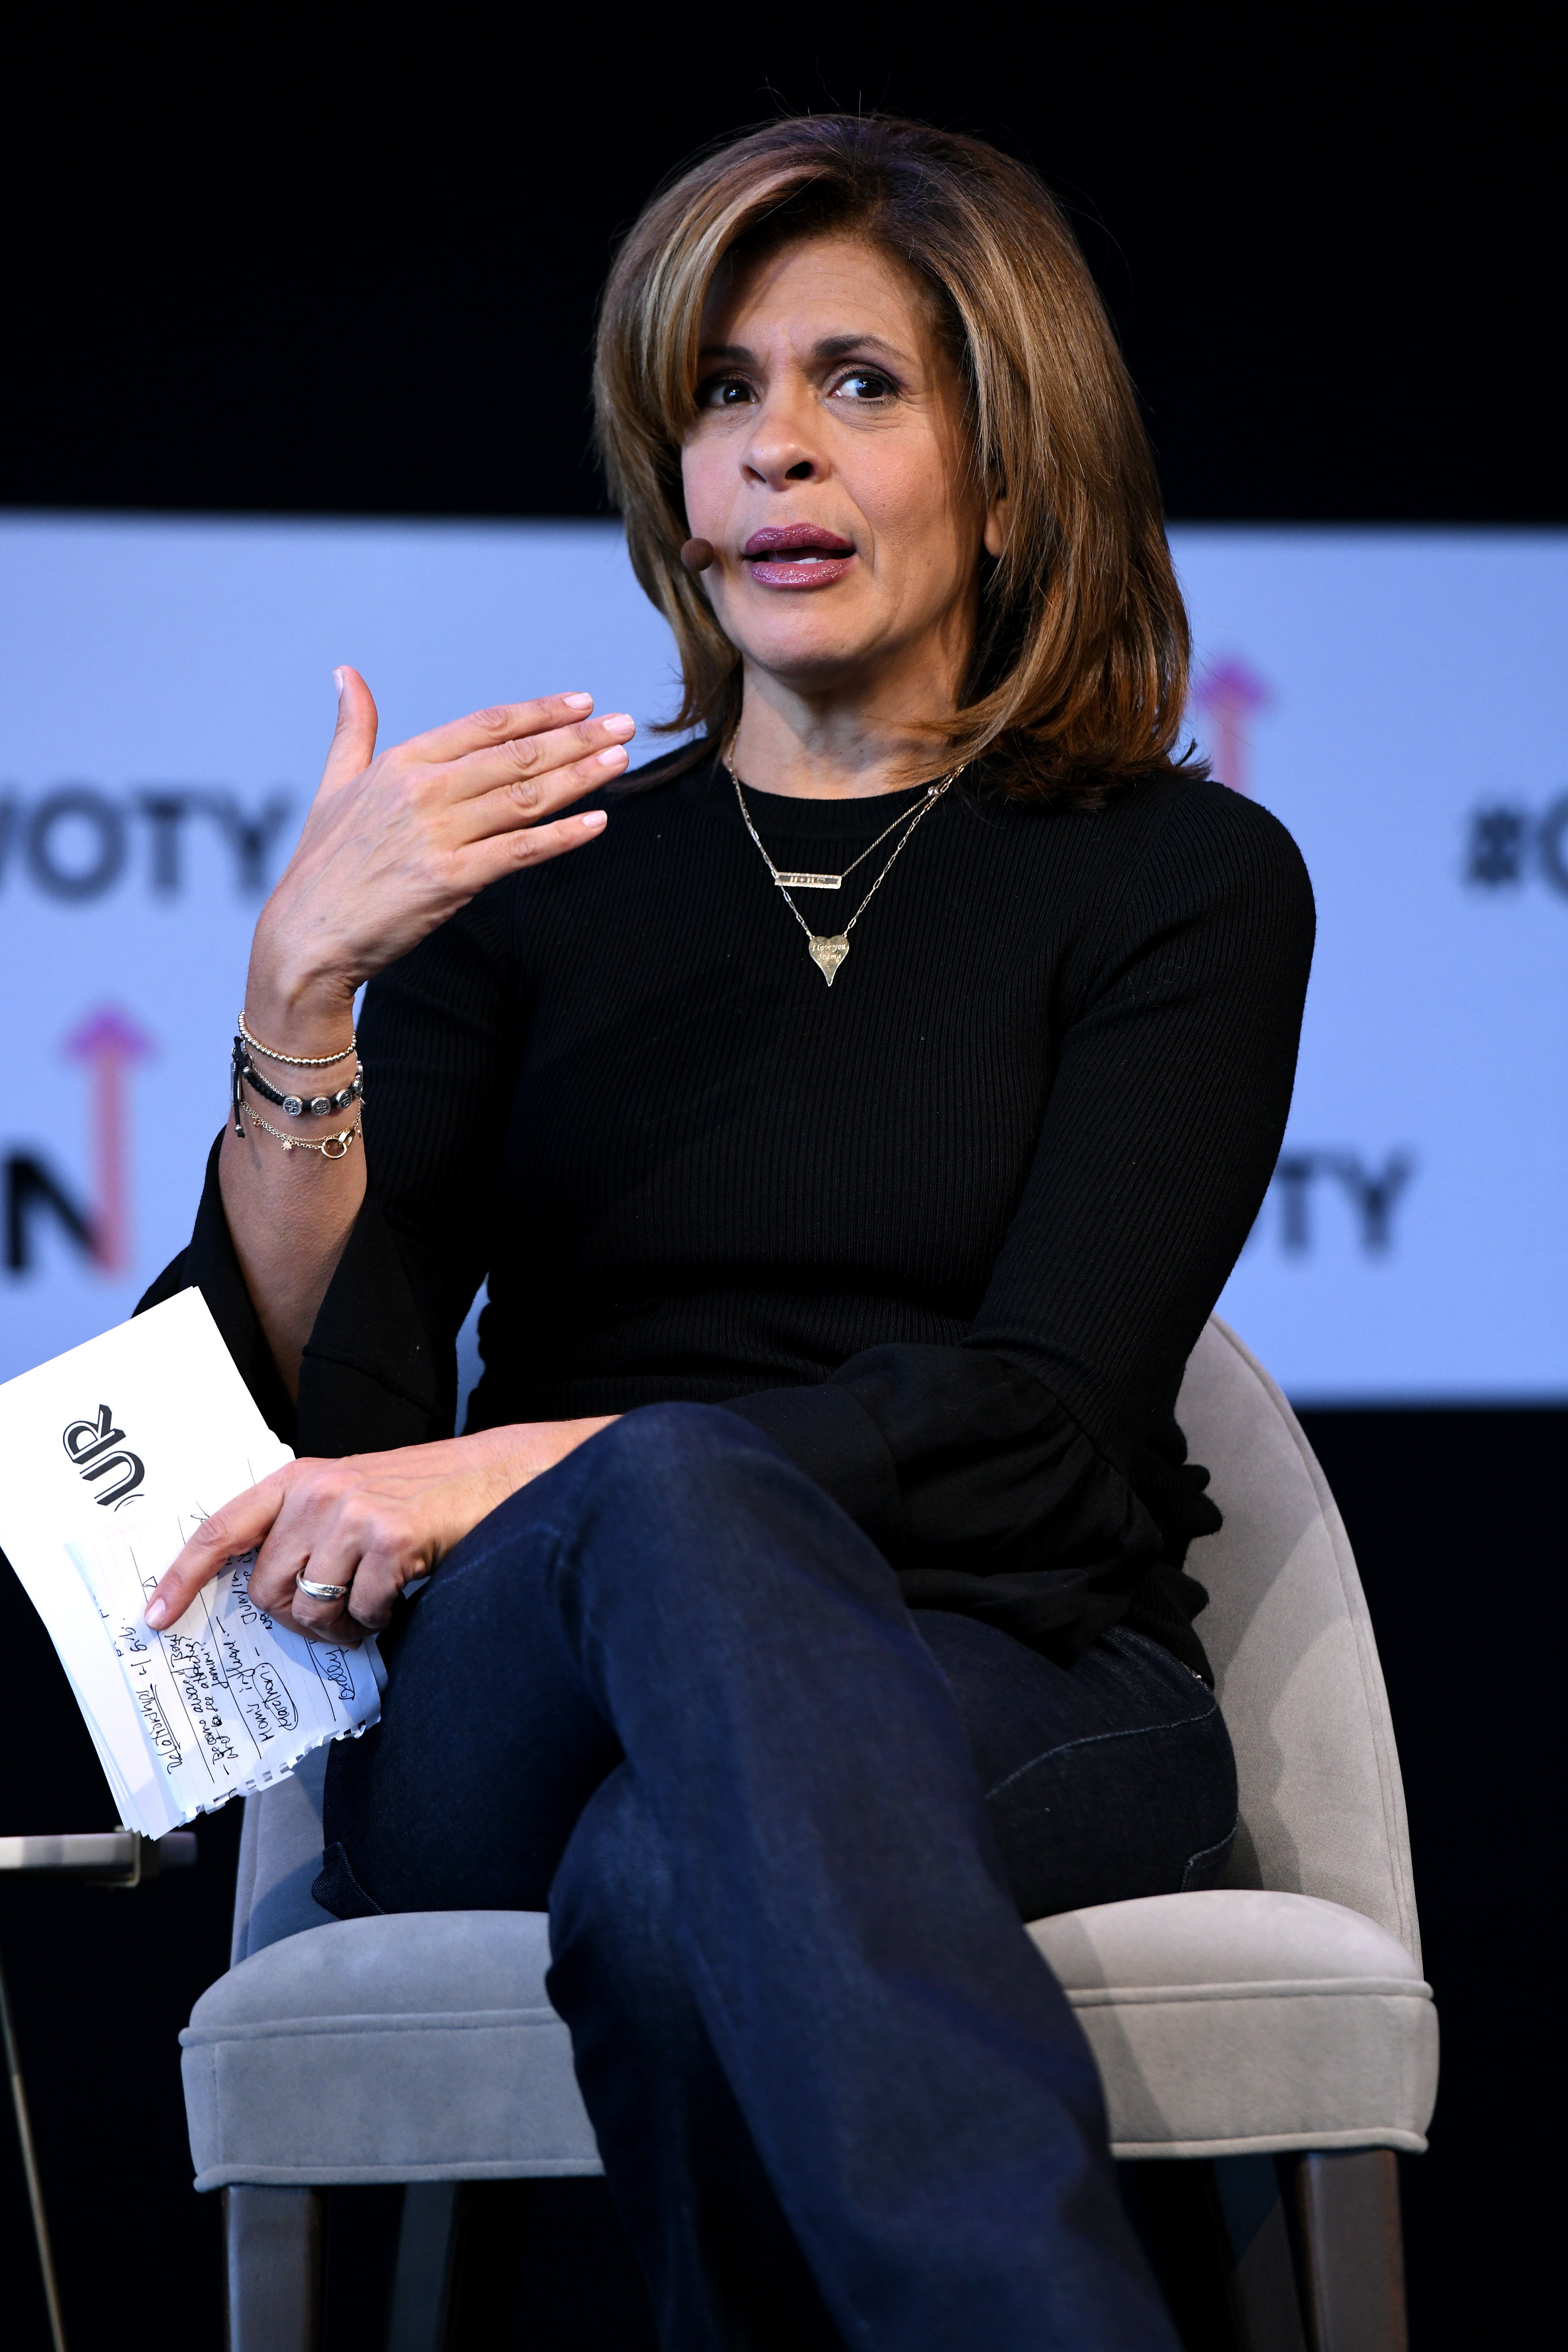 Hoda Kotb speaks at the "Closing the Dream Gap: Showing Girls What's Next" panel in New York City | Photo: Getty Images